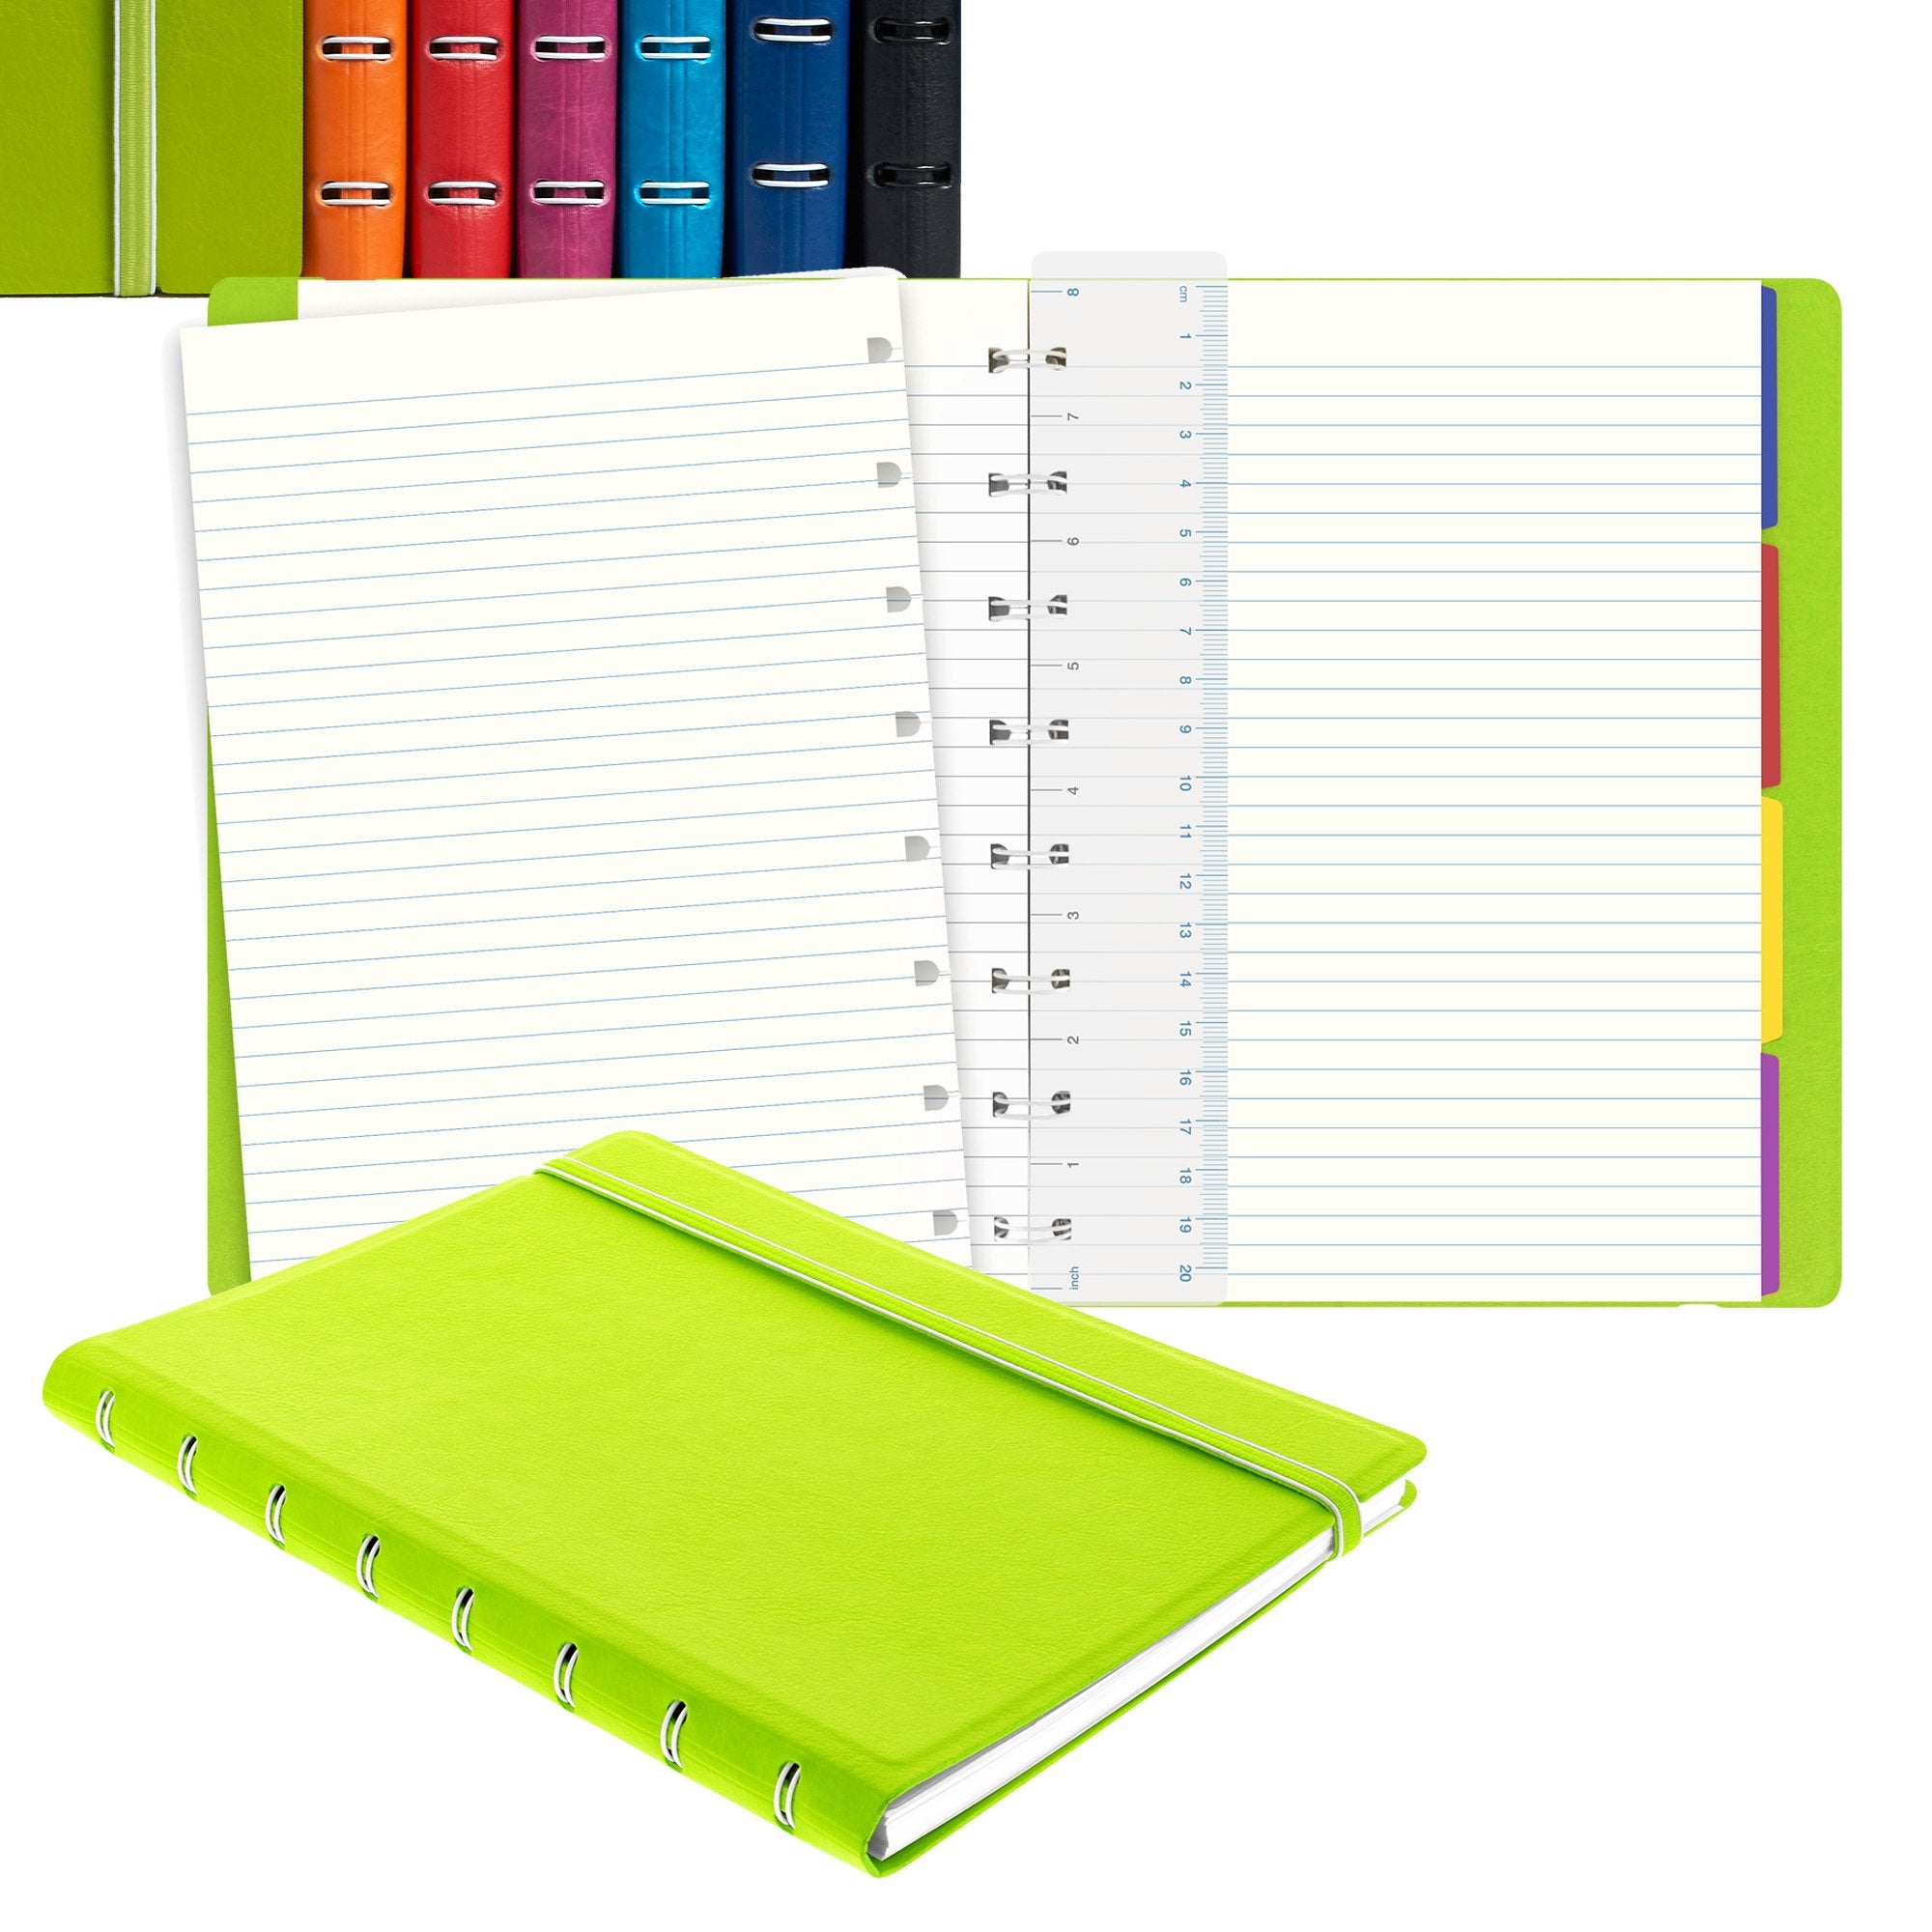 filofax-notebook-f-to-a5-righe-56-pag-nero-similpelle